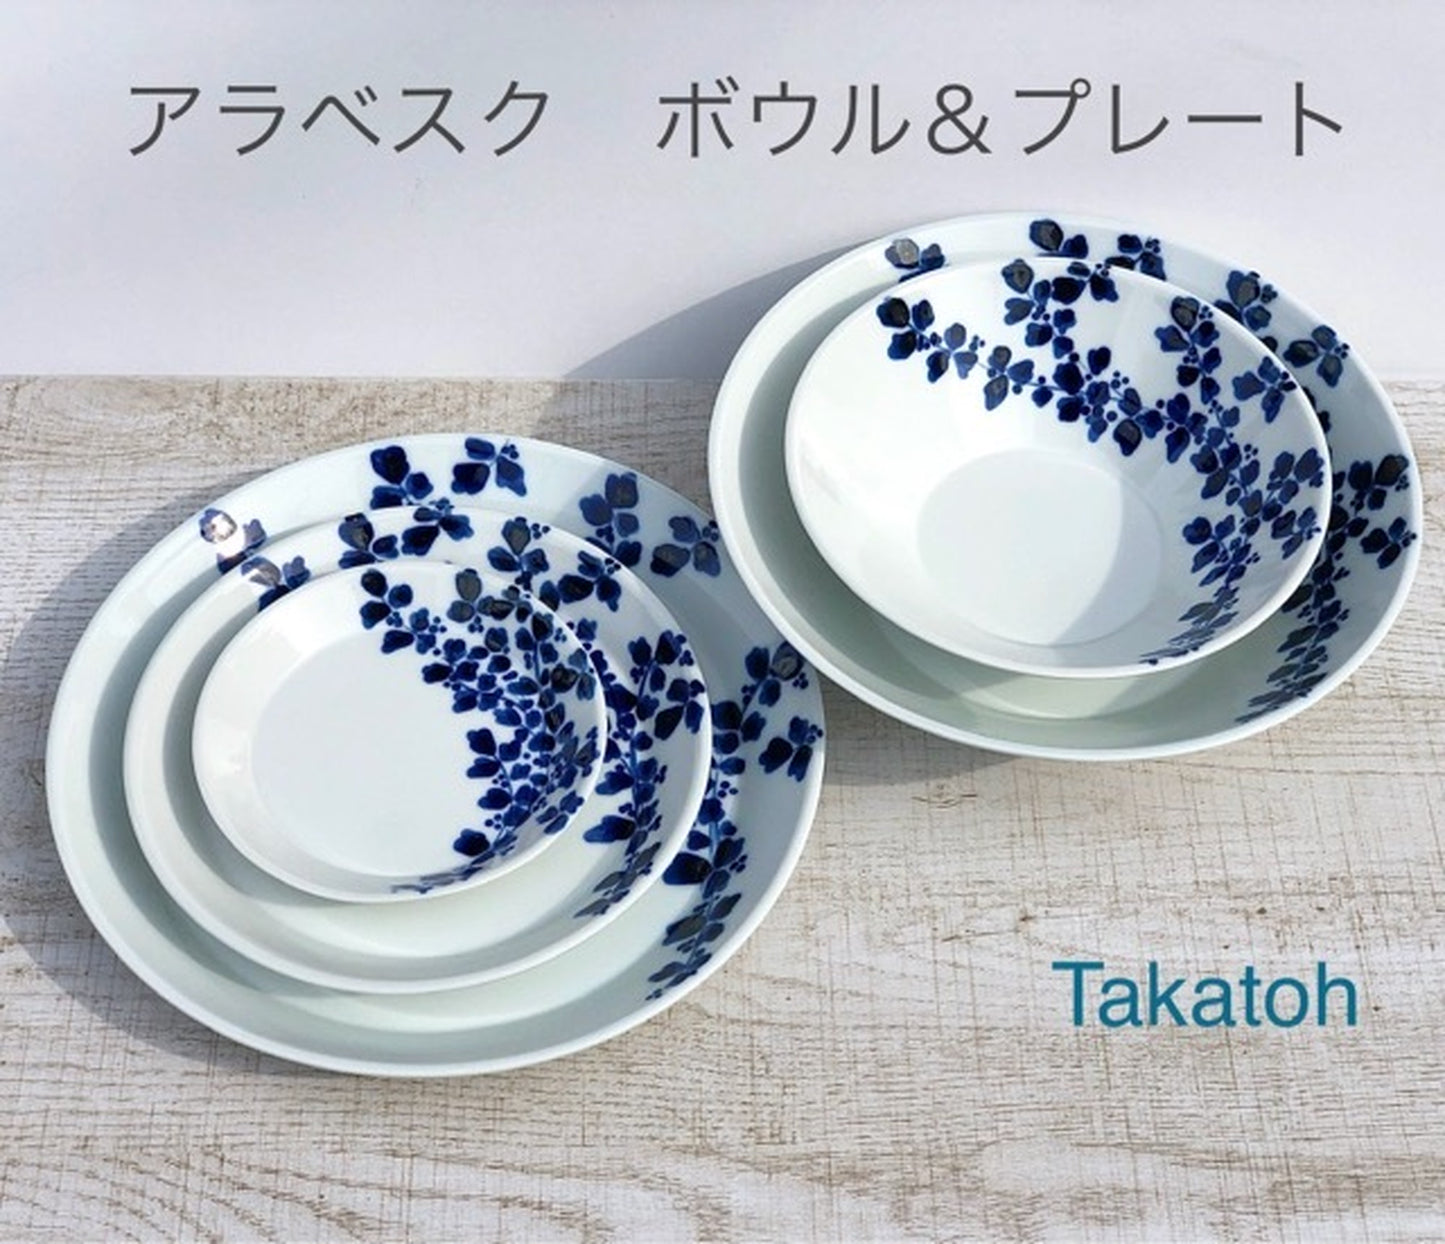 [Hasami ware] [Nakazen] [Arabesque] [Plate M] 16.3cm plant arabesque pattern hand-painted plate cake plate Hasami ware fashionable adult colorful cute